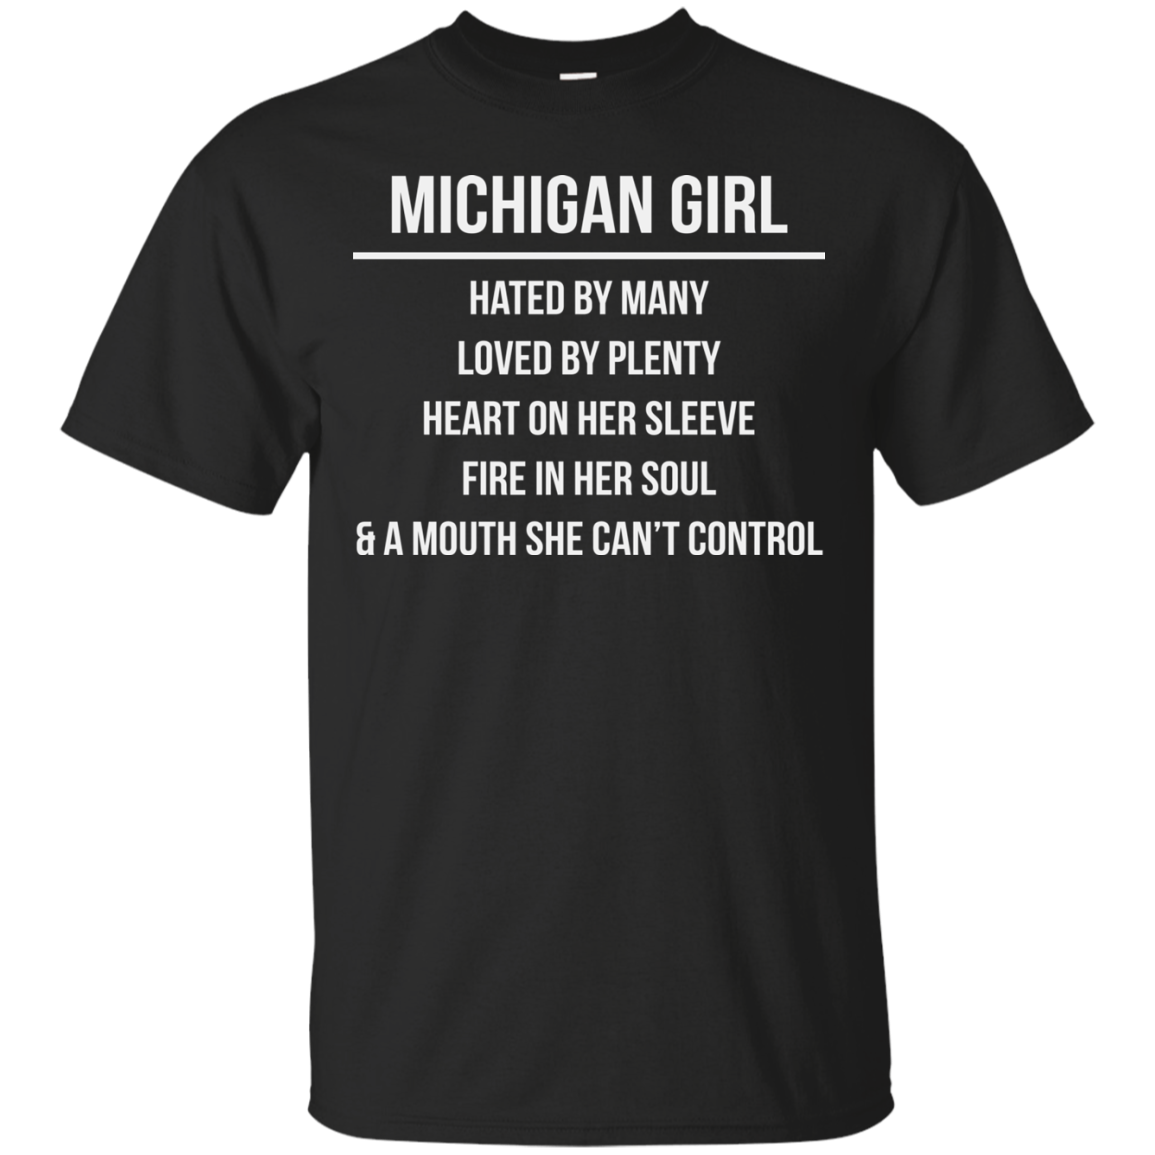 Michigan girl hated by many loved by plenty heart on her sleeve shirt, tank